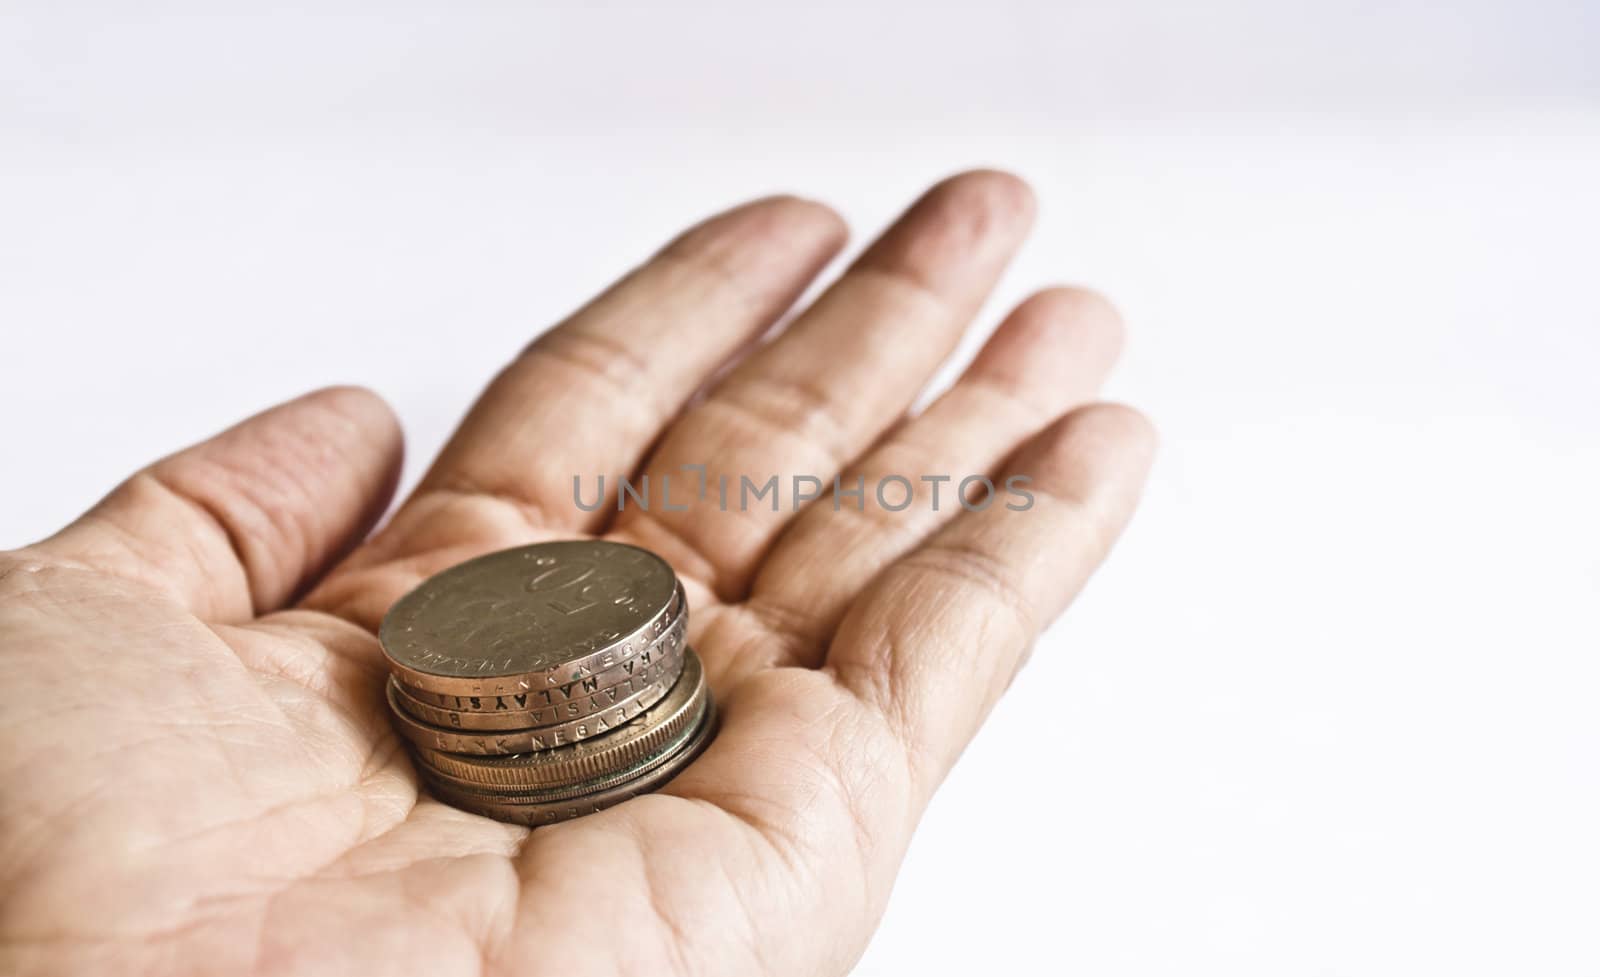 A show of some coins in a stretched out hand